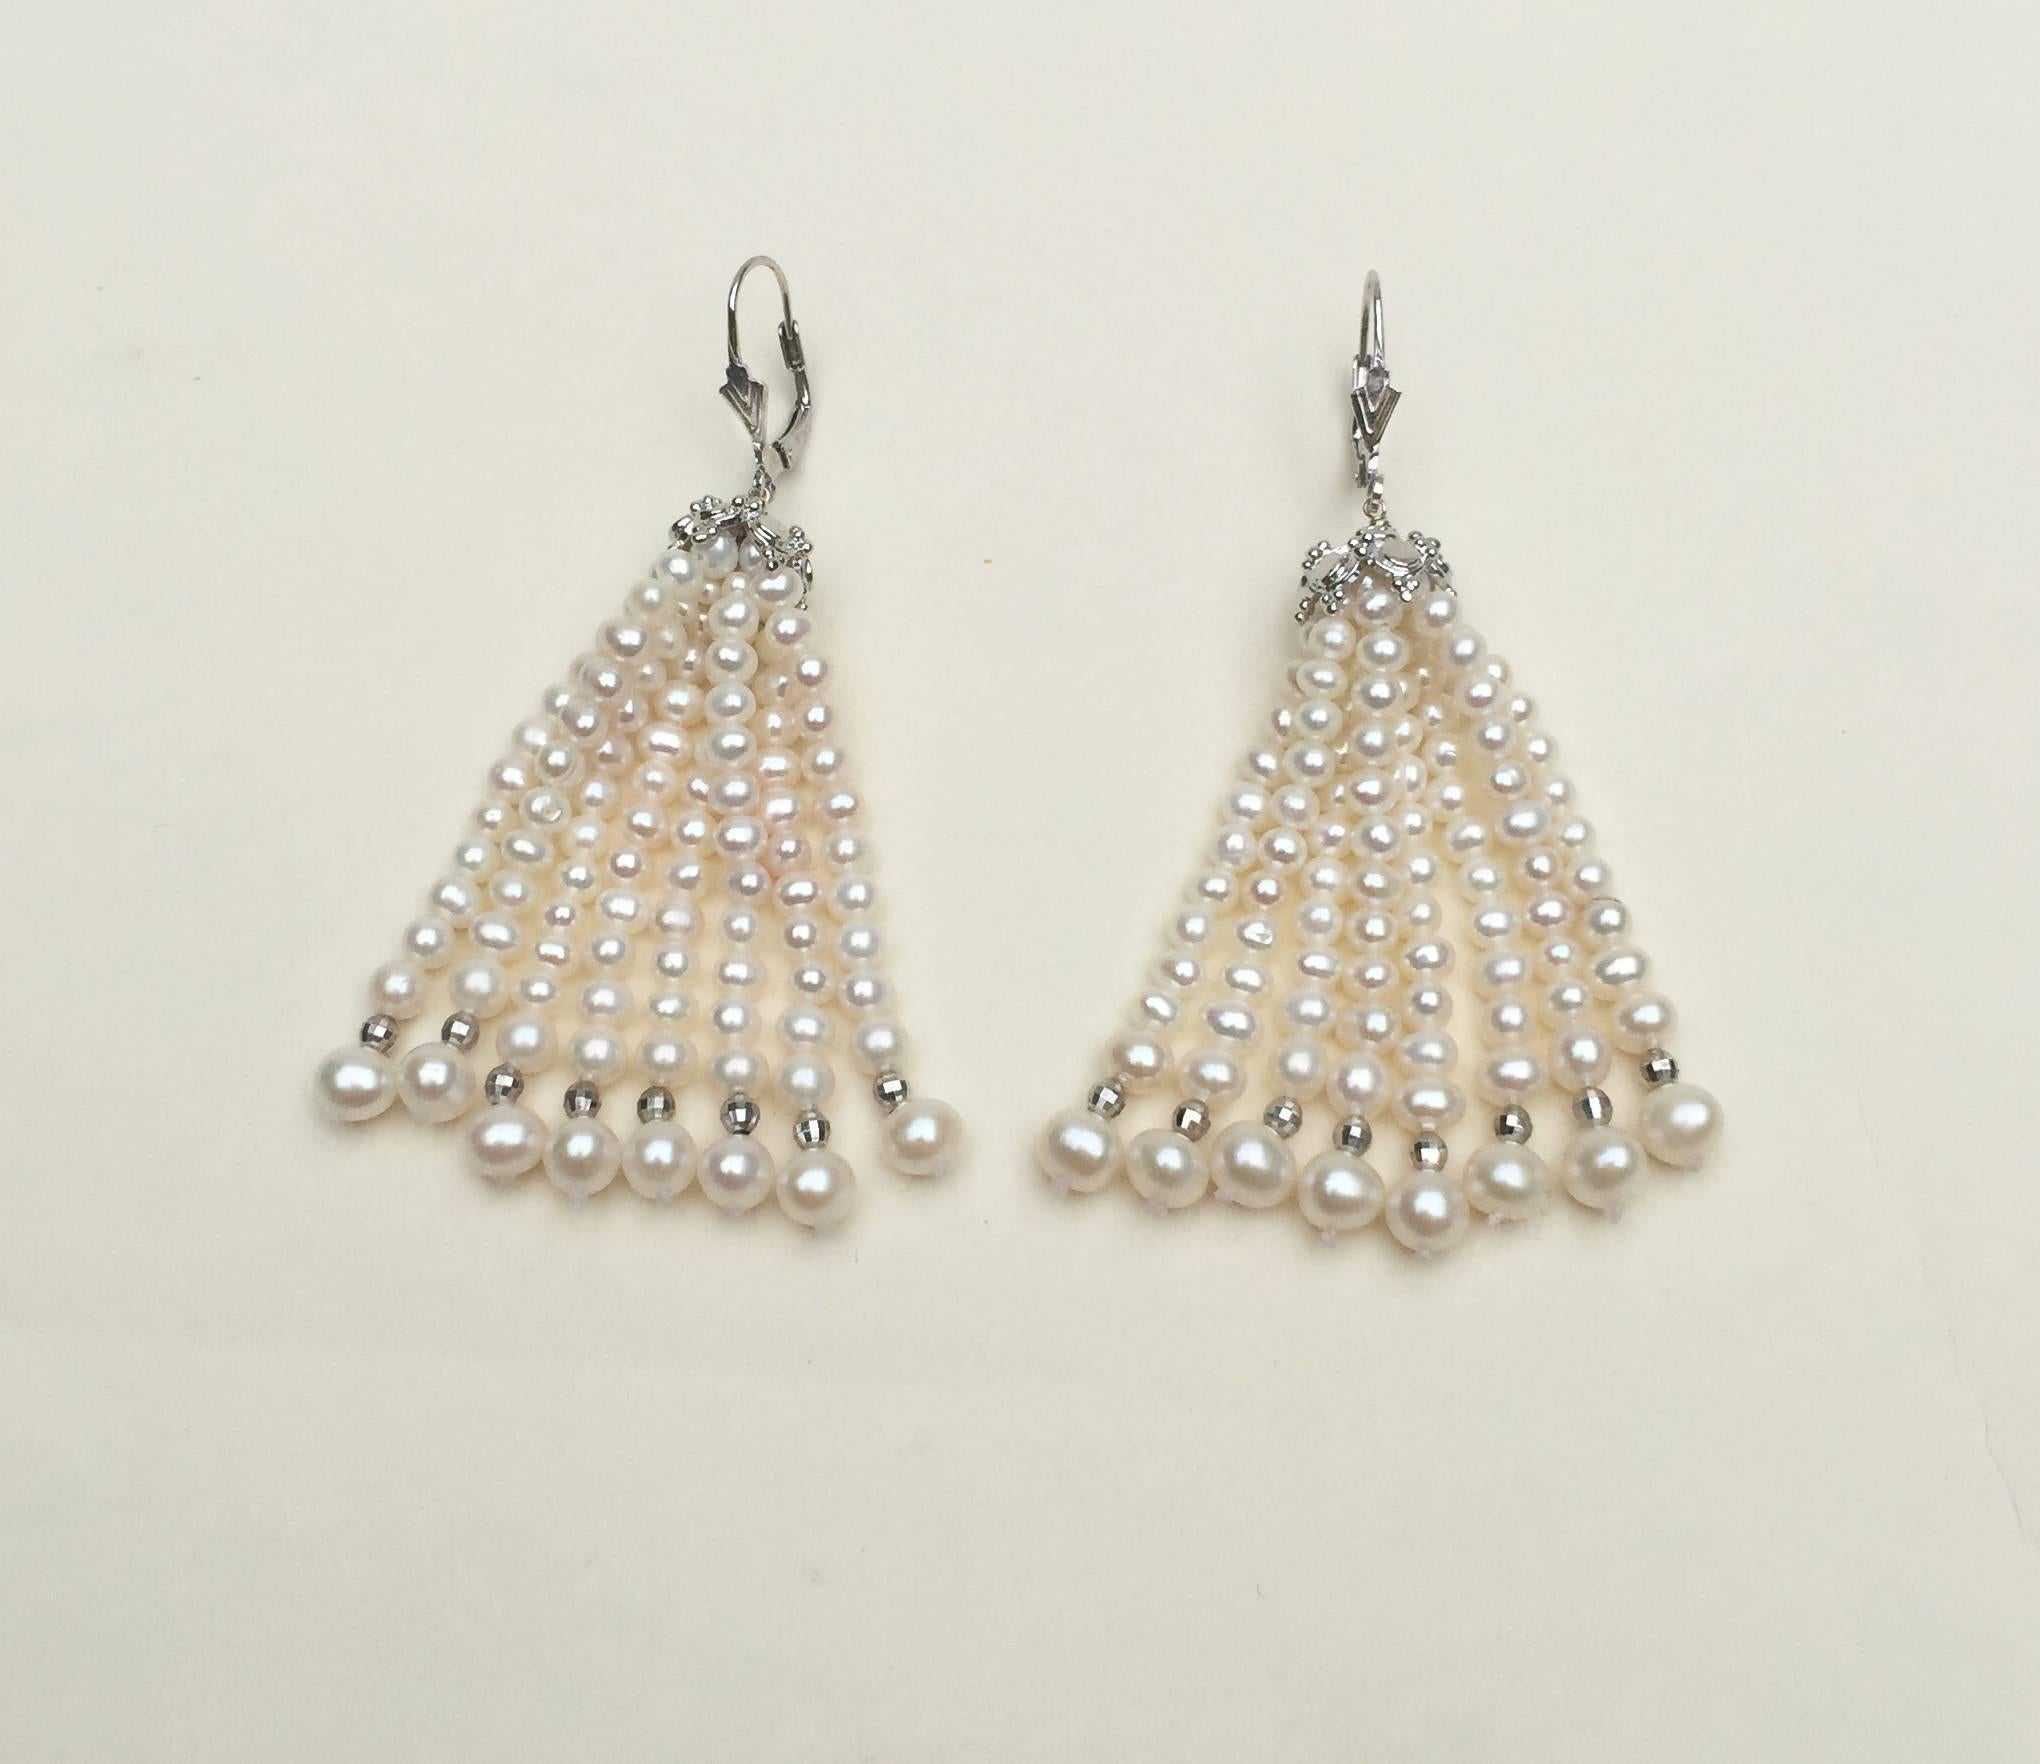 These pearl tassel earring are graduated pearls ranging from 3 mm - 5 mm, highlighted by 14 k white gold beads and a white gold plated silver cup. The cup is designed with a graduated design to mirror the graduated tassel. The lever back is 14 k